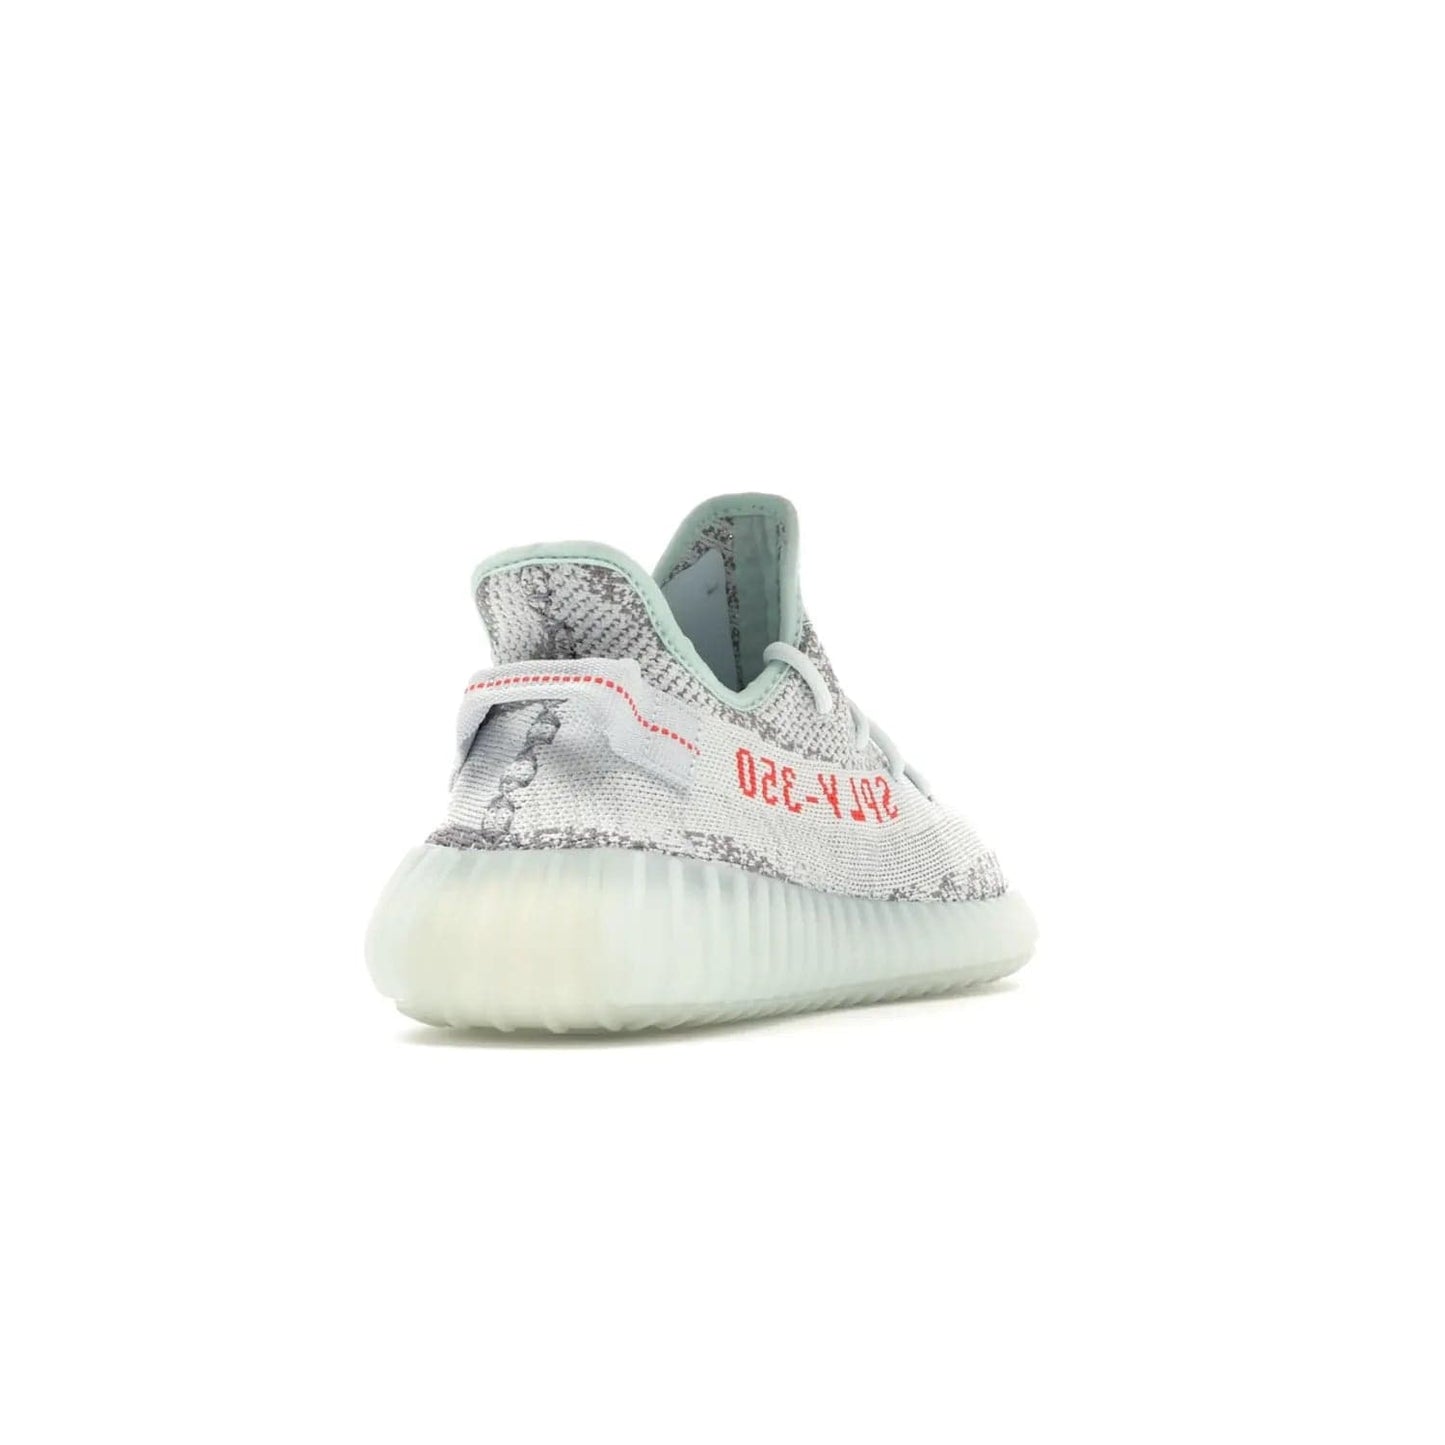 adidas Yeezy Boost 350 V2 Blue Tint - Image 31 - Only at www.BallersClubKickz.com - The adidas Yeezy Boost 350 V2 Blue Tint merges fashion and functionality with its Primeknit upper and Boost sole. Released in December 2017, this luxurious sneaker is perfect for making a stylish statement.